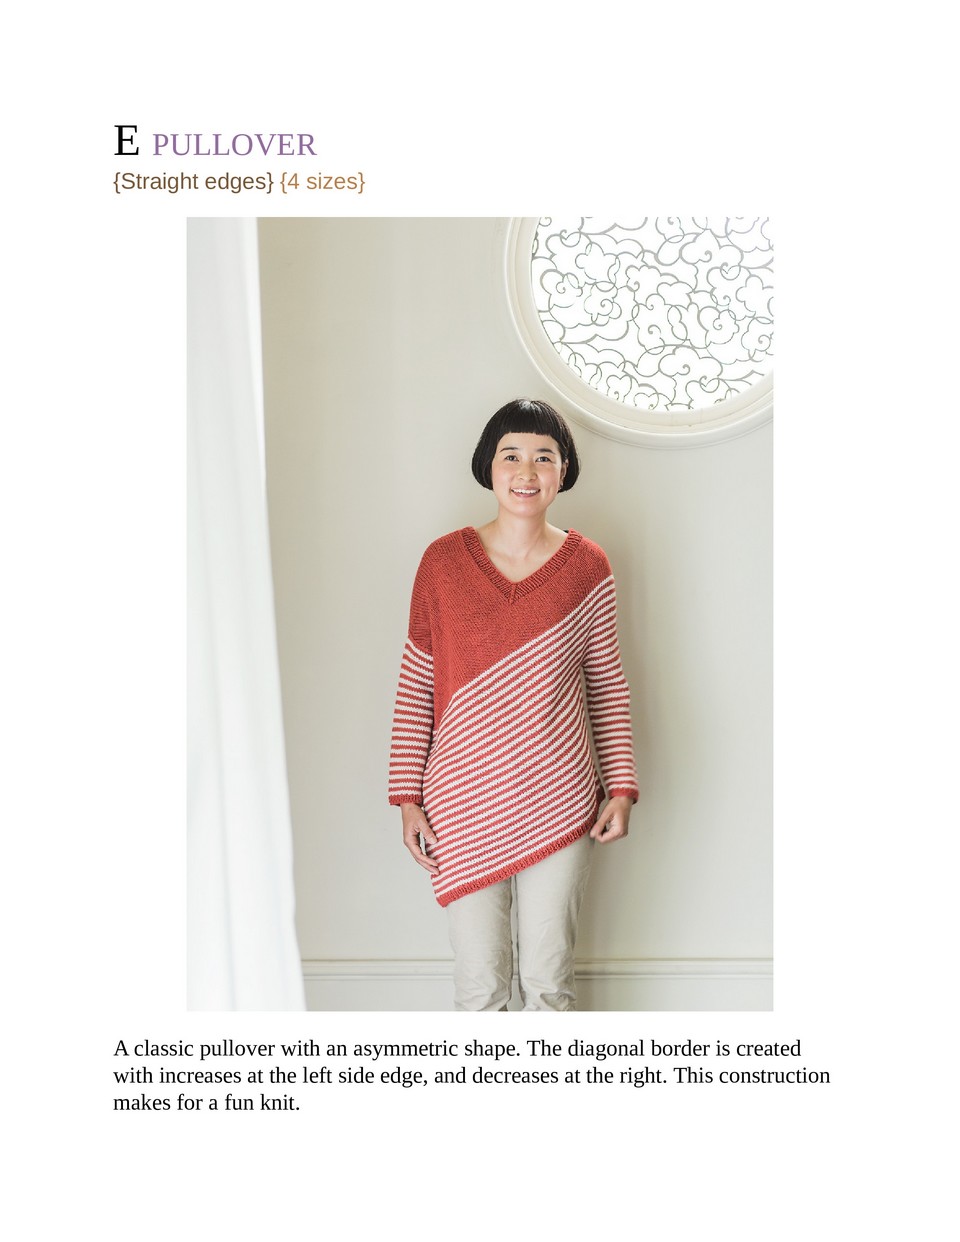 Japanese Knitting Patterns for Sweaters Scarves and More-39